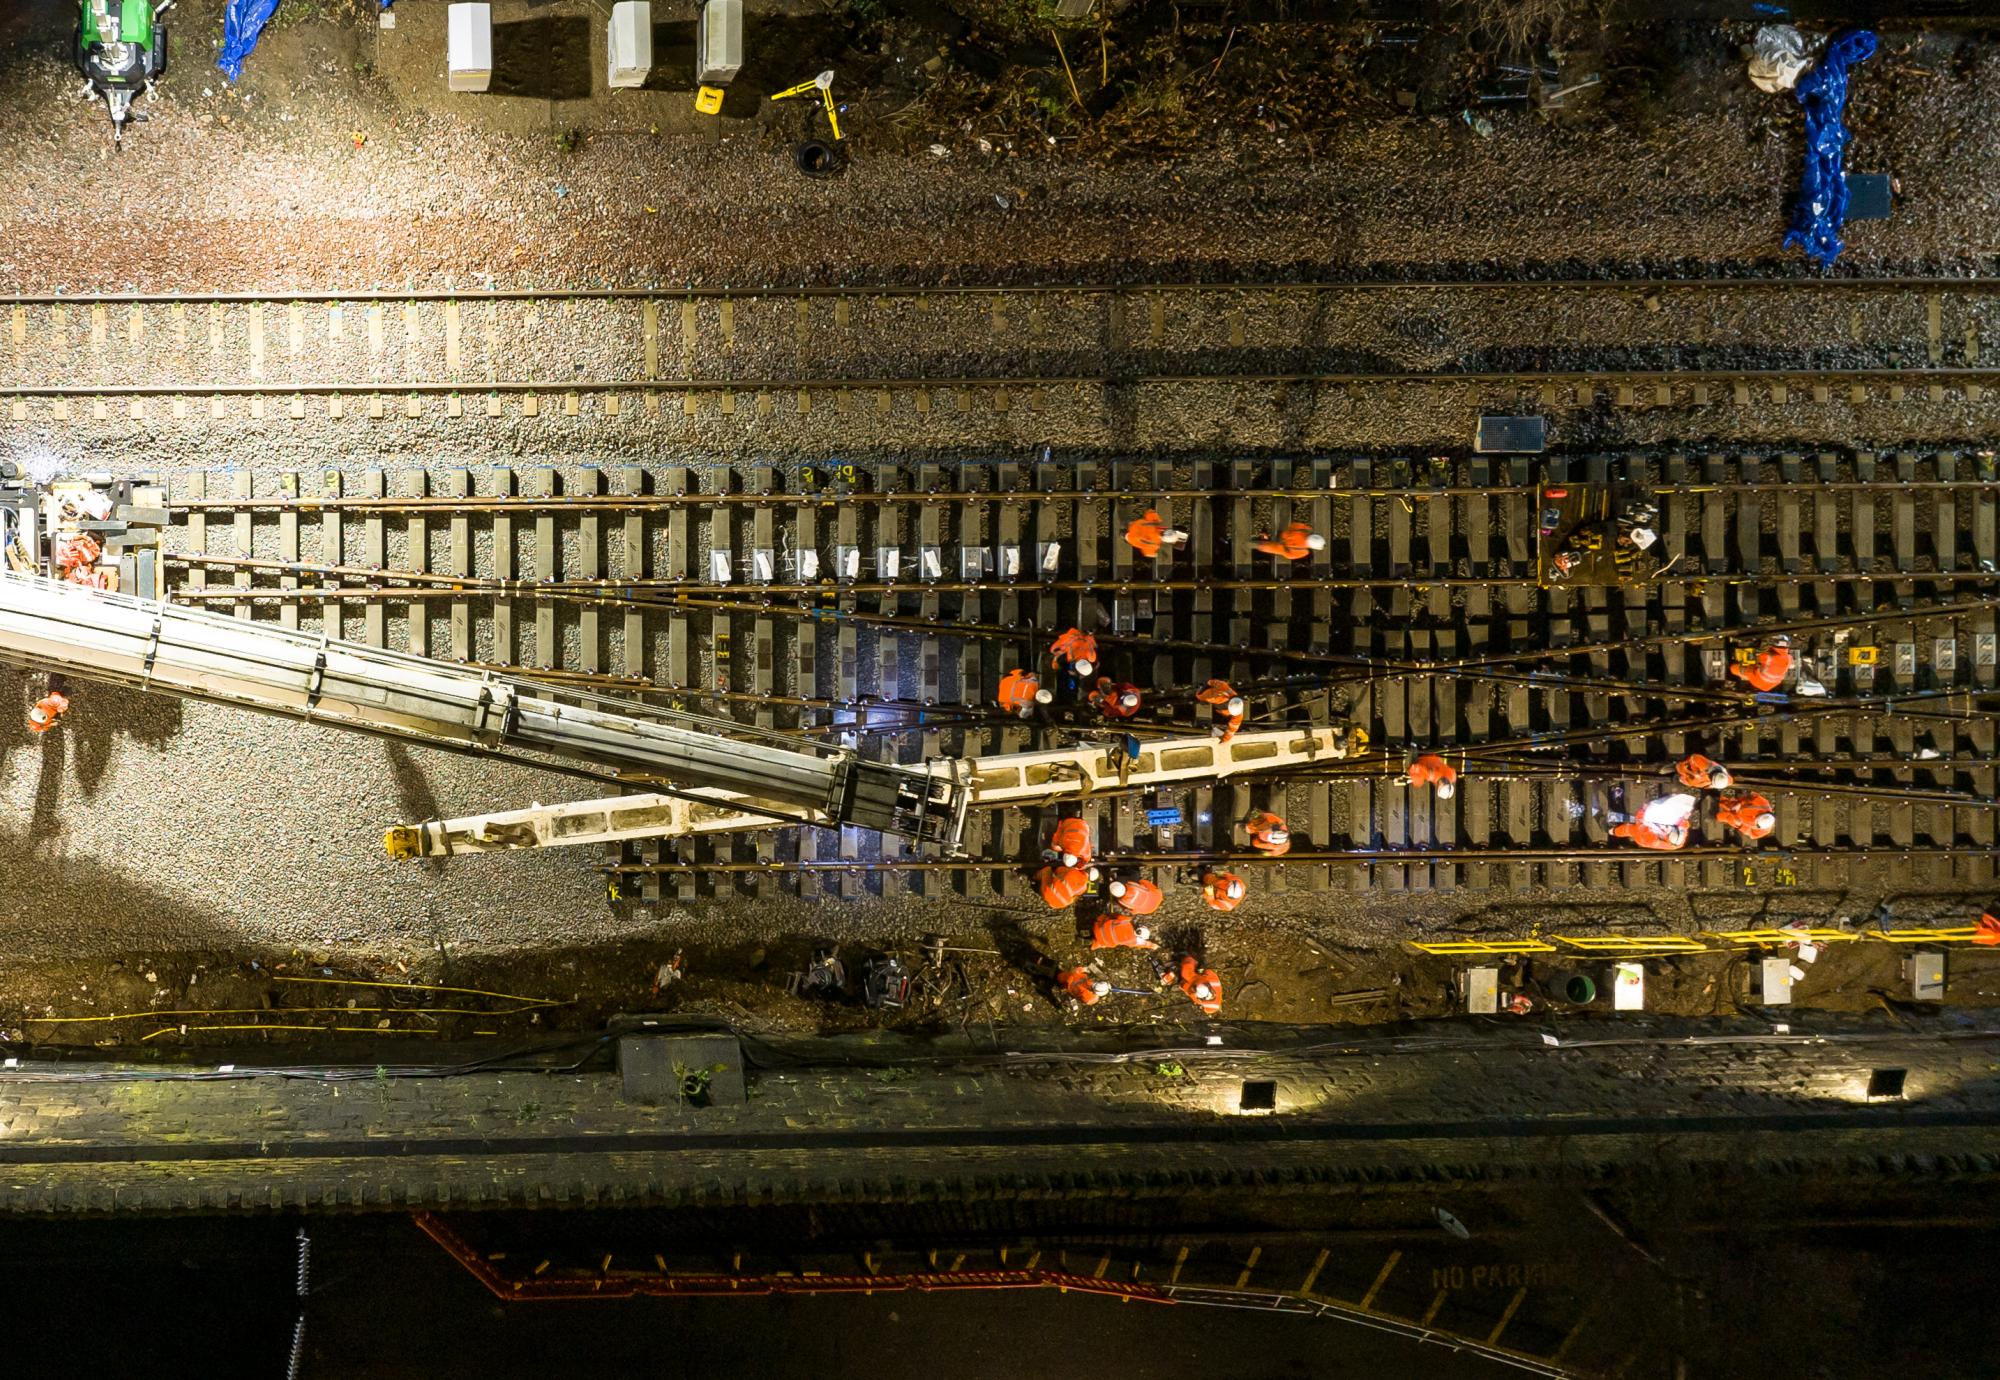 Installing new track crossing at Holbeck, Leeds, via Network Rail